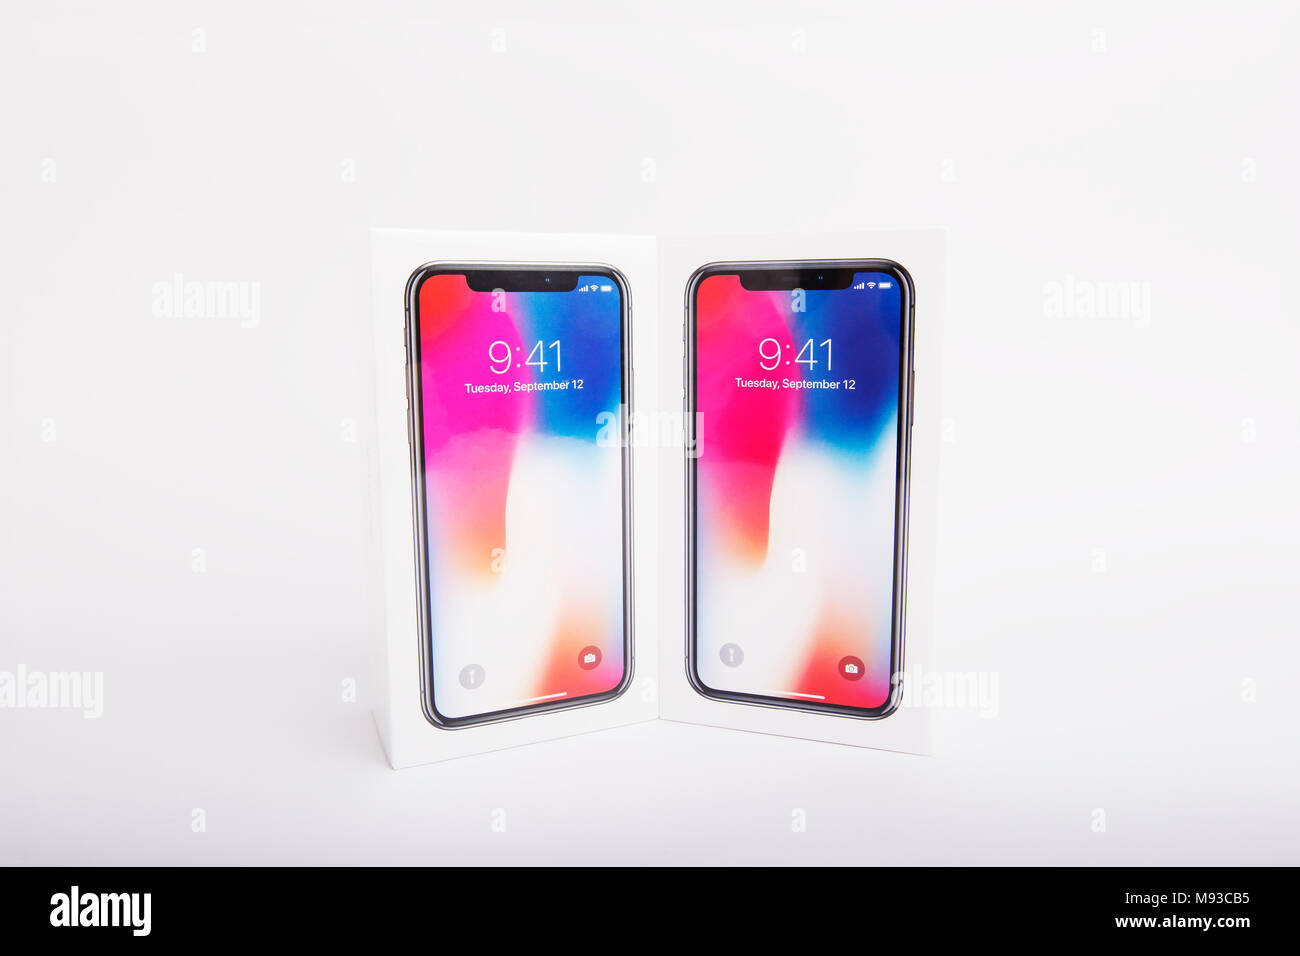 New Iphone X Smart Phone.Newest Apple Iphone 10 Editorial Stock, iphone 10  